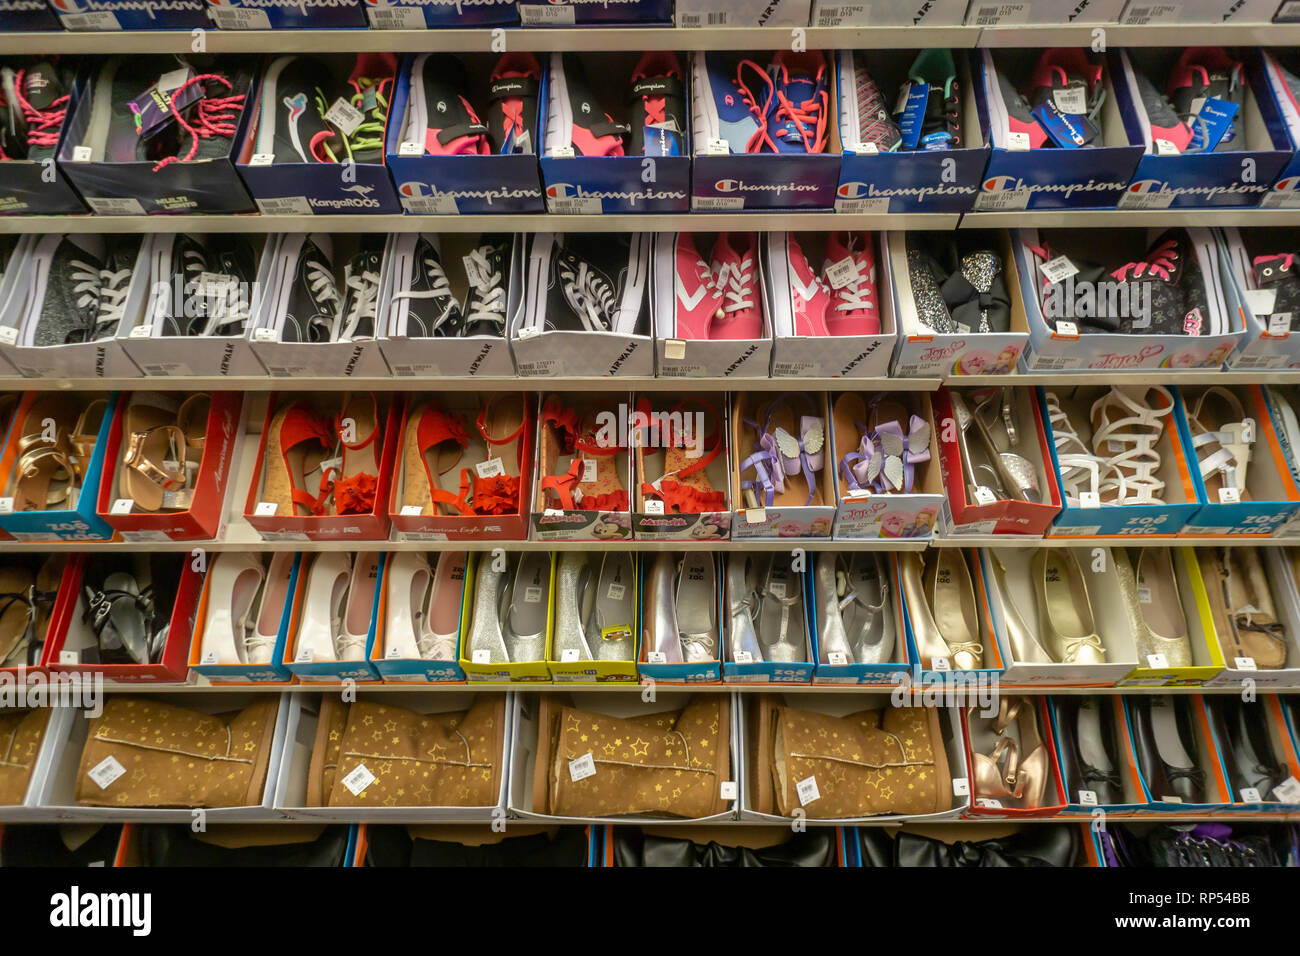 Children's shoes in a Payless ShoeSource store in Herald Square in New York  on Monday, February 18, 2019. The retailer is closing all of its 2100  stores in the U.S. and Puerto